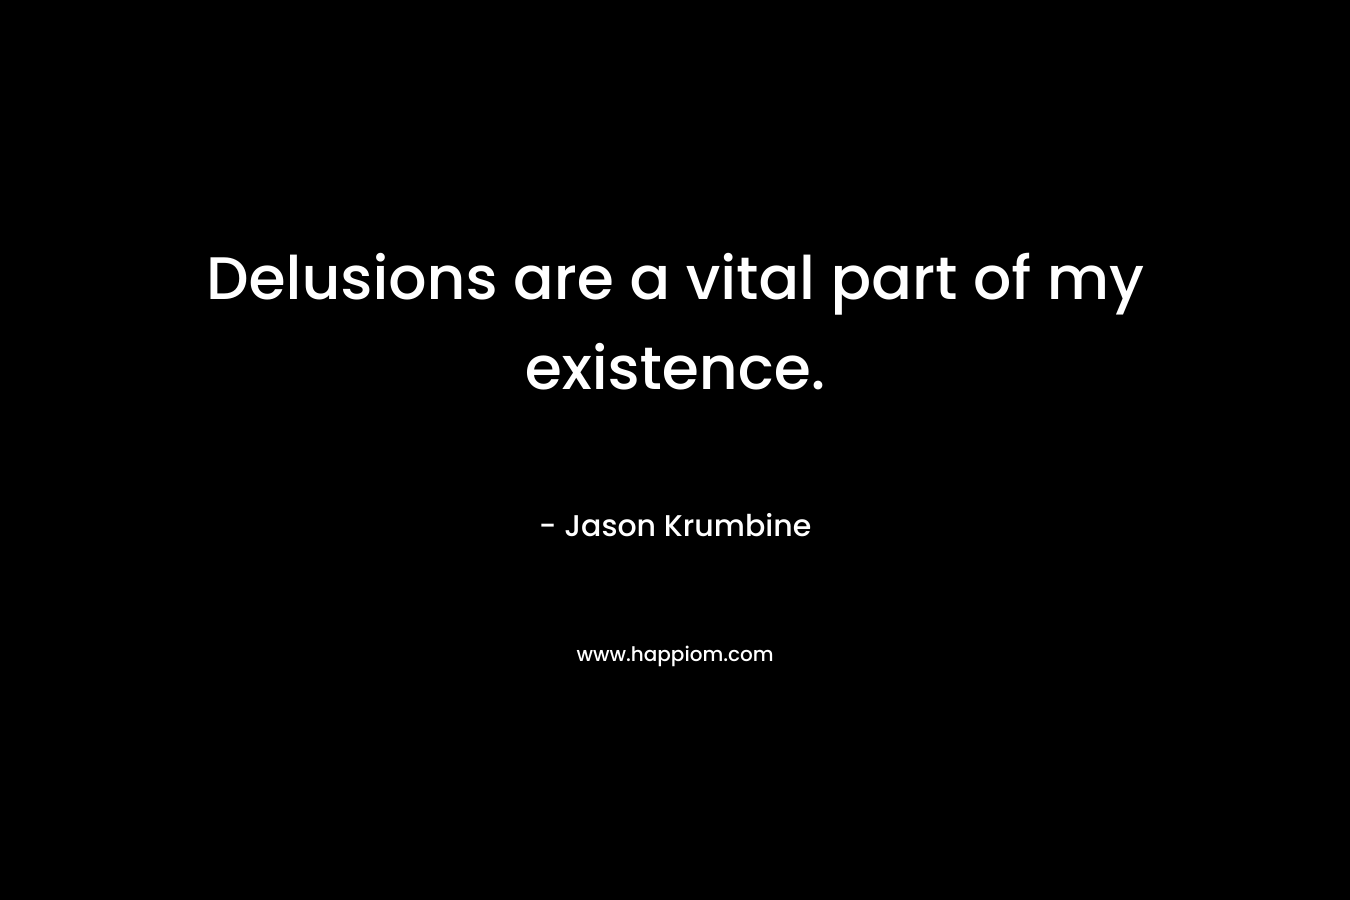 Delusions are a vital part of my existence.